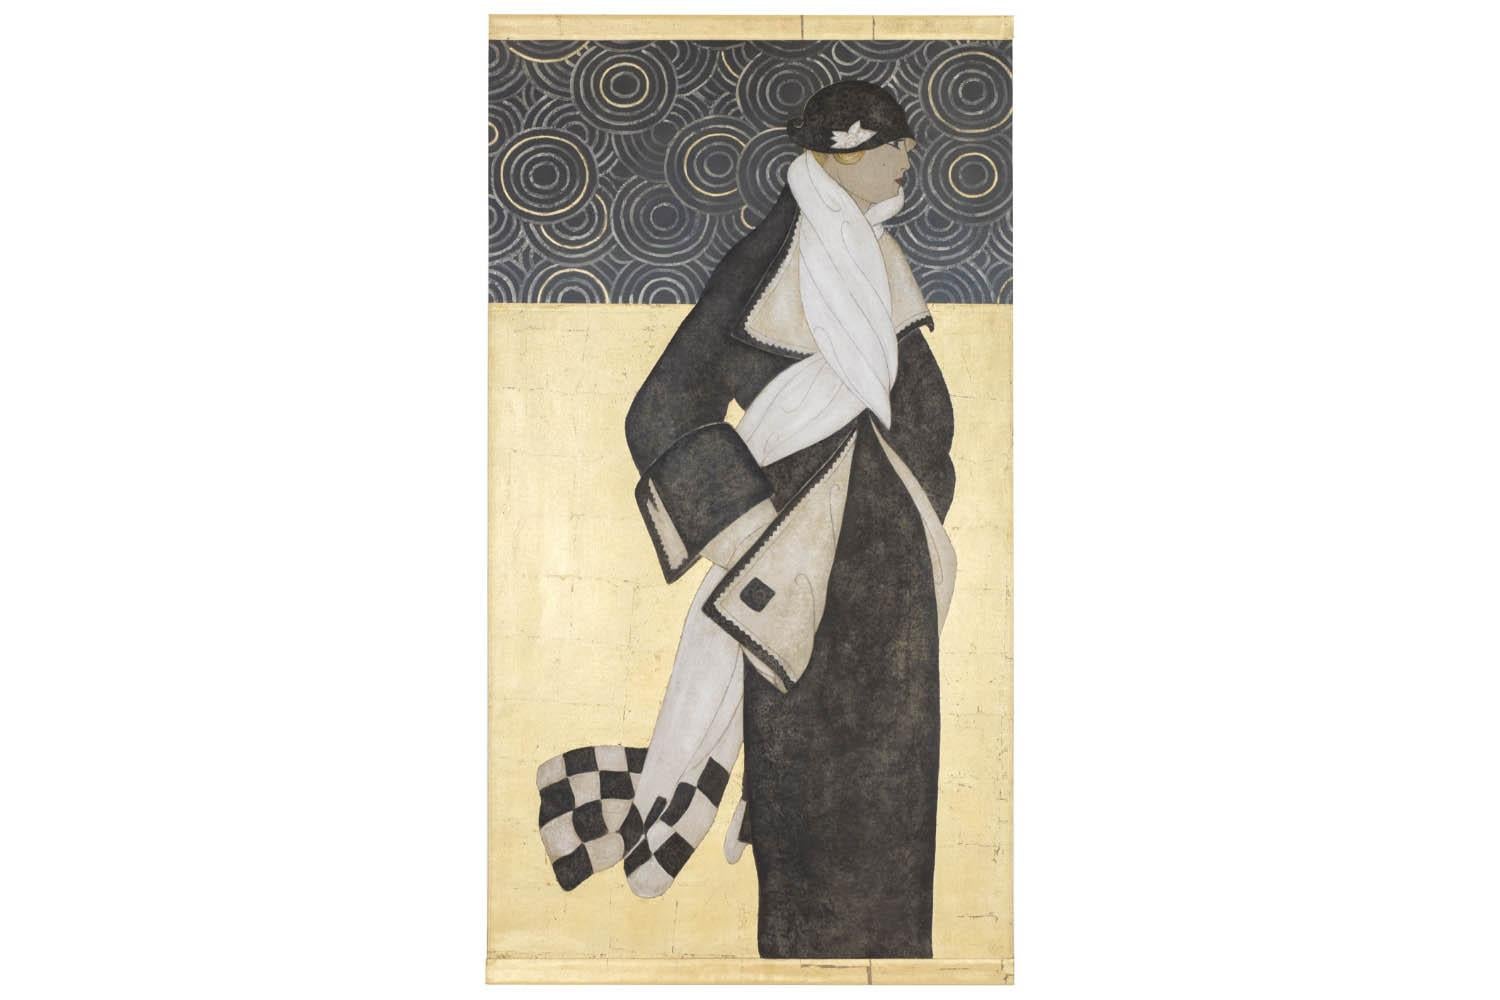 Painted canvas figuring a side view Art Deco woman. She wears a large black coat with white collar and interior. She wears a black hat on her head adorned with a white flowers and a long white scarf with black checkerboard motifs around her